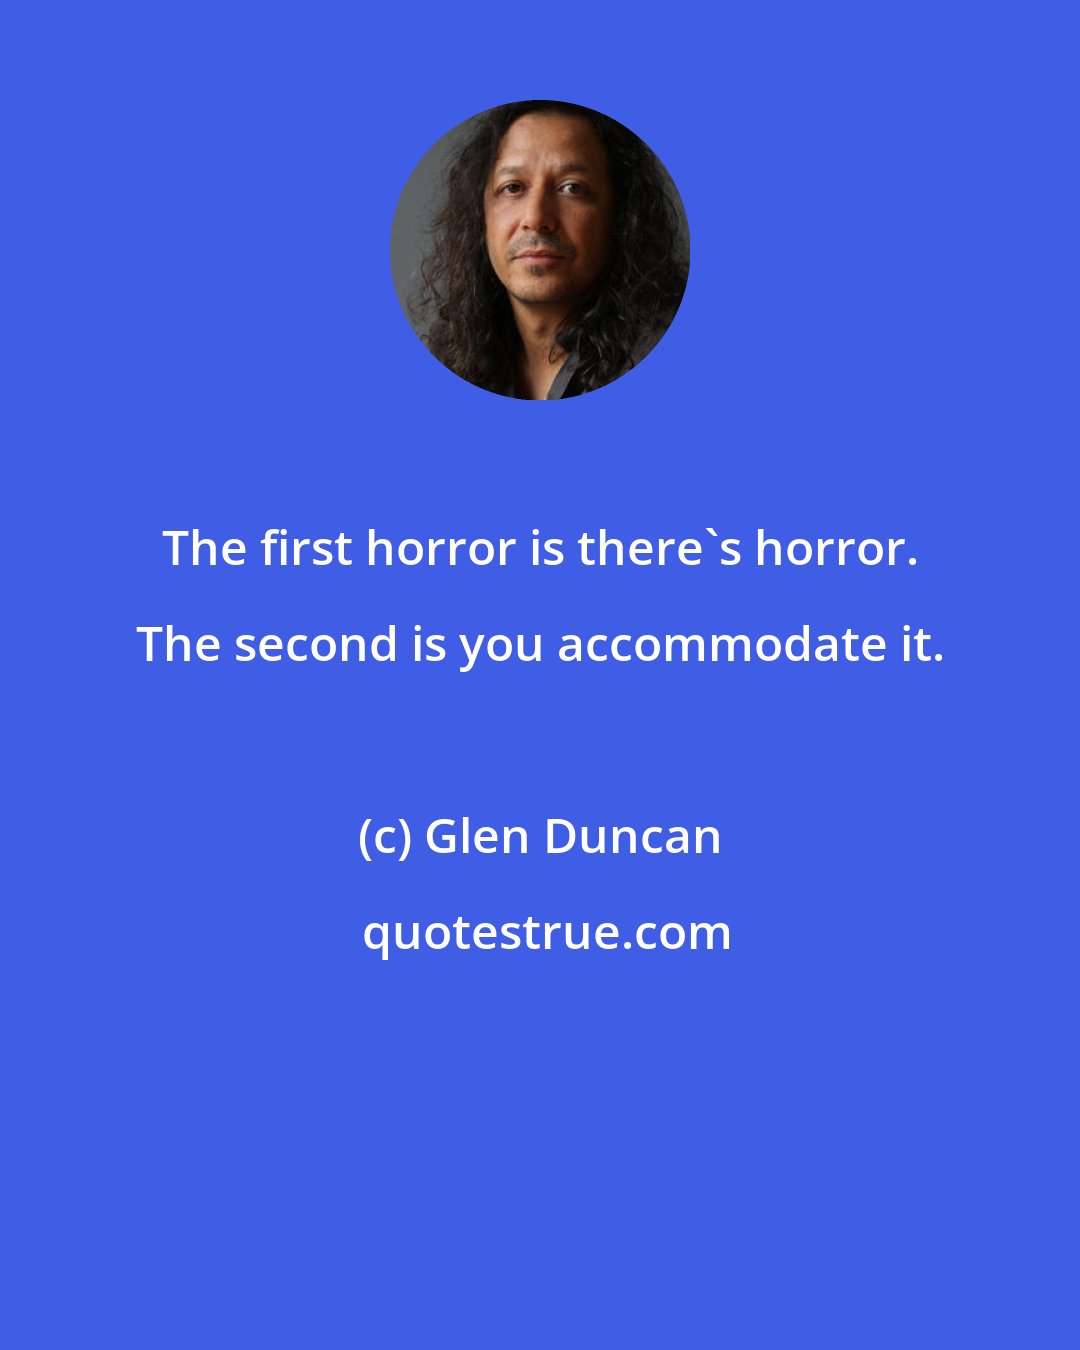 Glen Duncan: The first horror is there's horror. The second is you accommodate it.